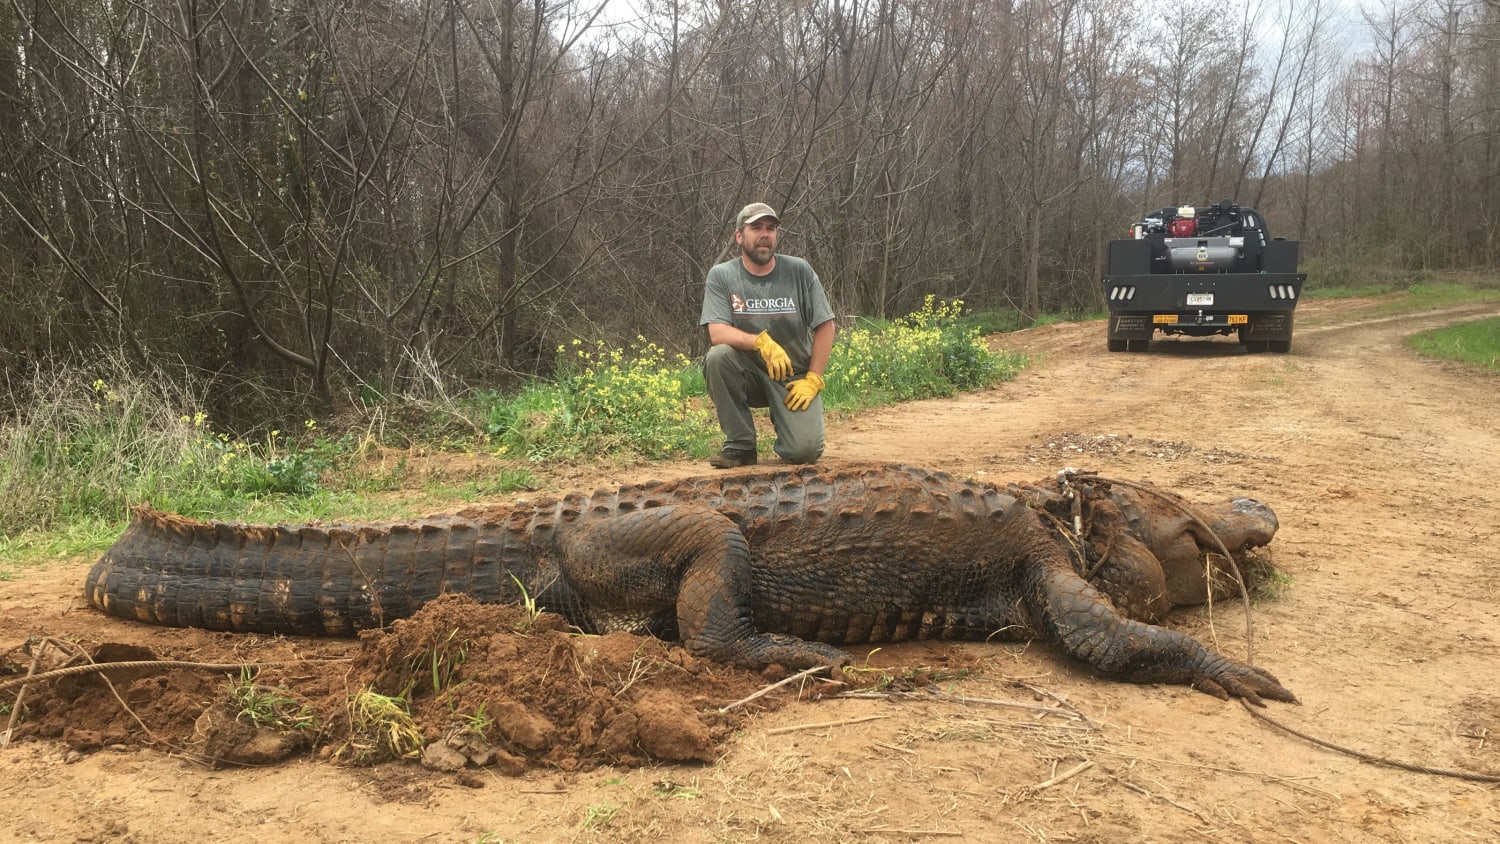 'Massive' alligator weighing about 700 pounds found in ditch